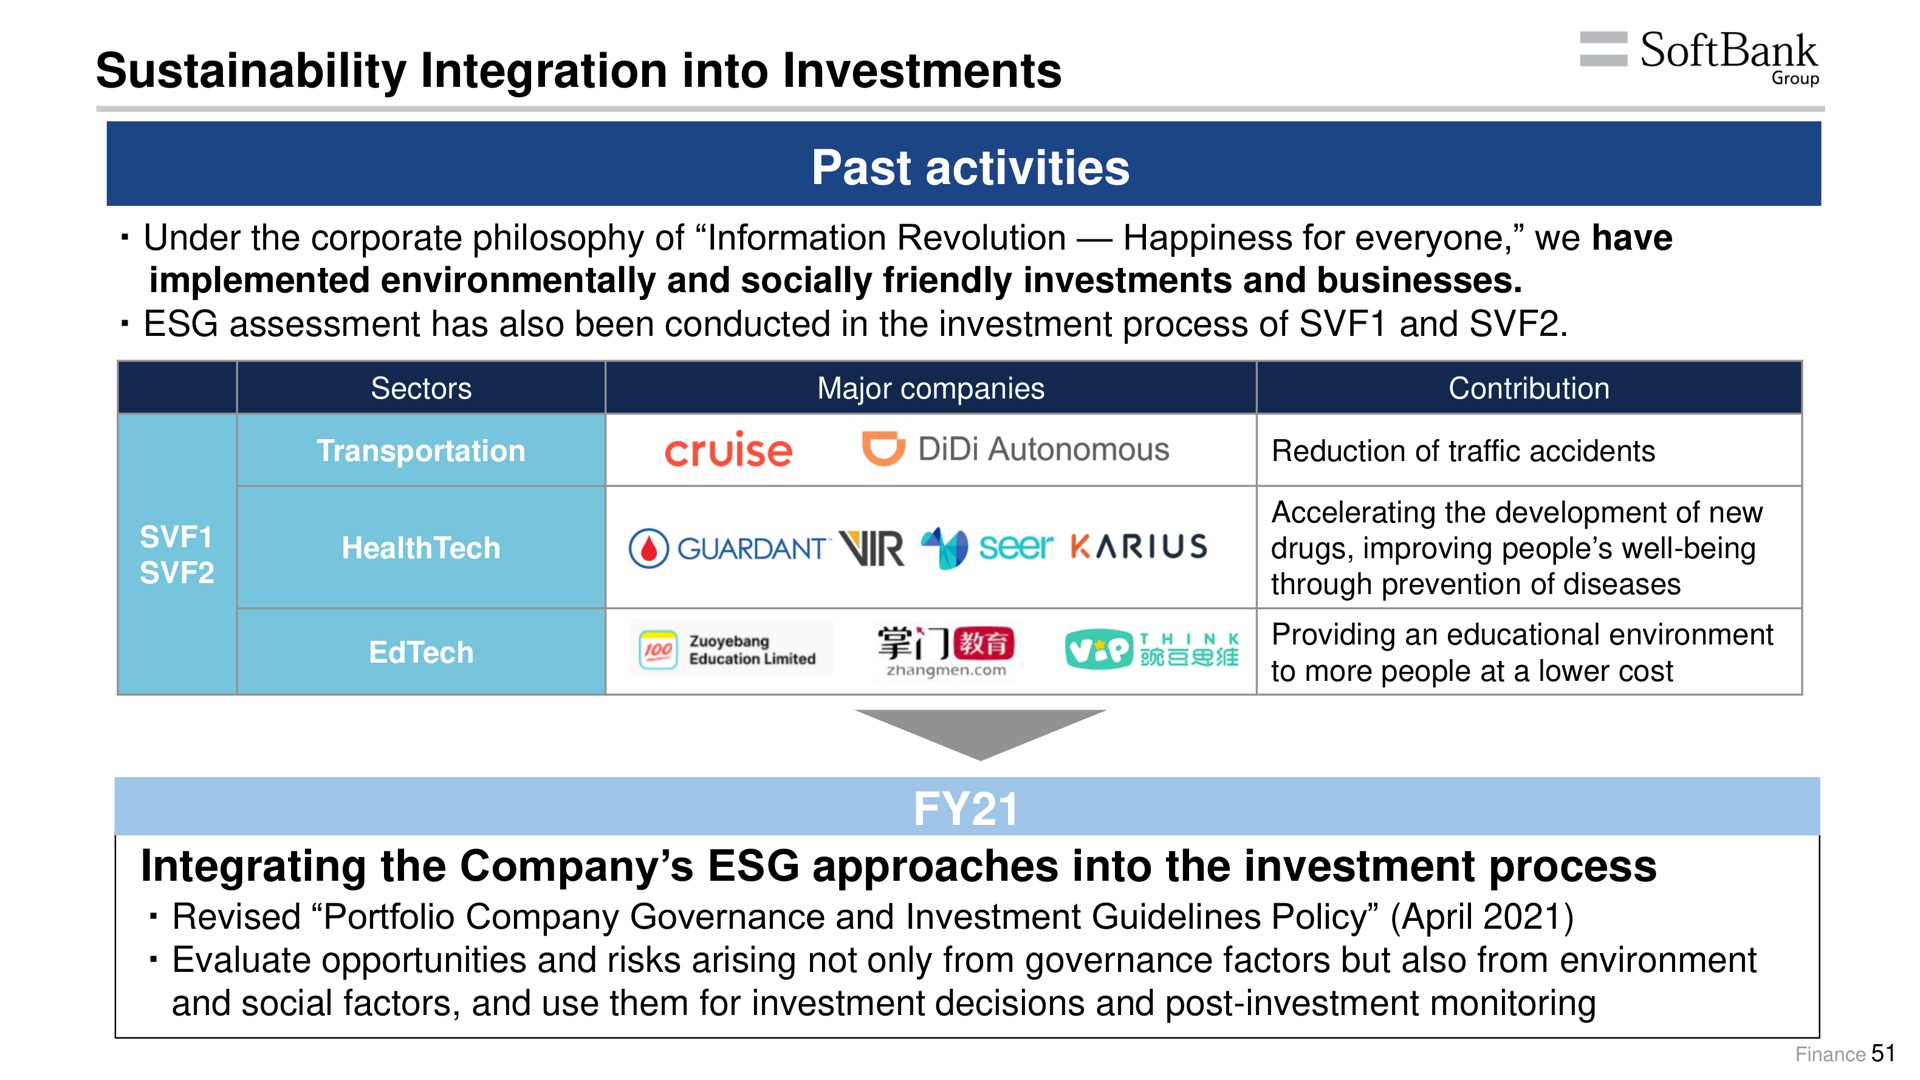 integration into investments past activities integrating the company approaches into the investment process group | SoftBank